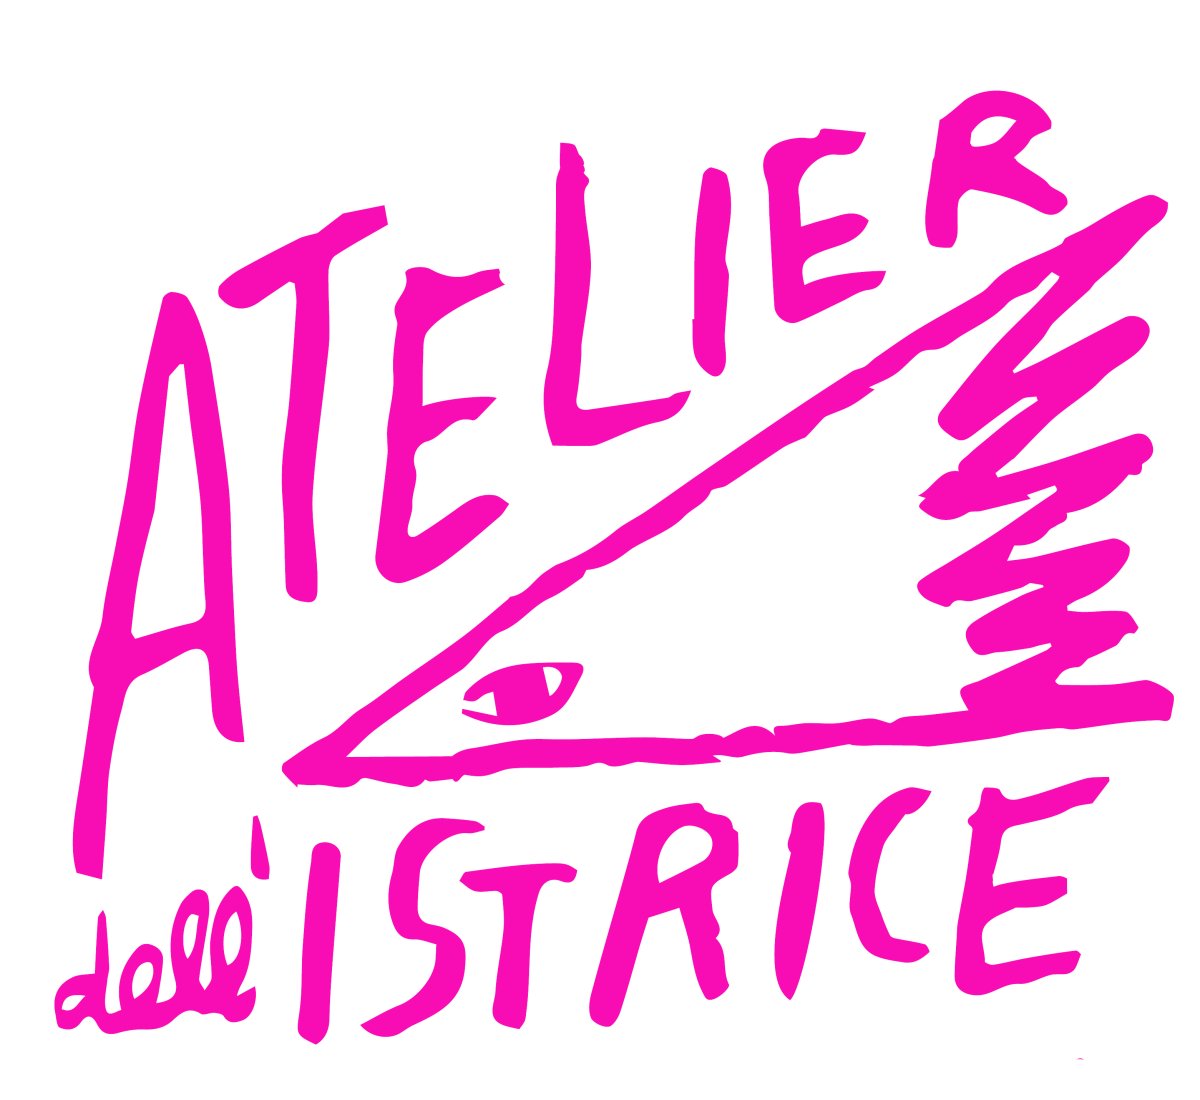 Atelier dell'istrice